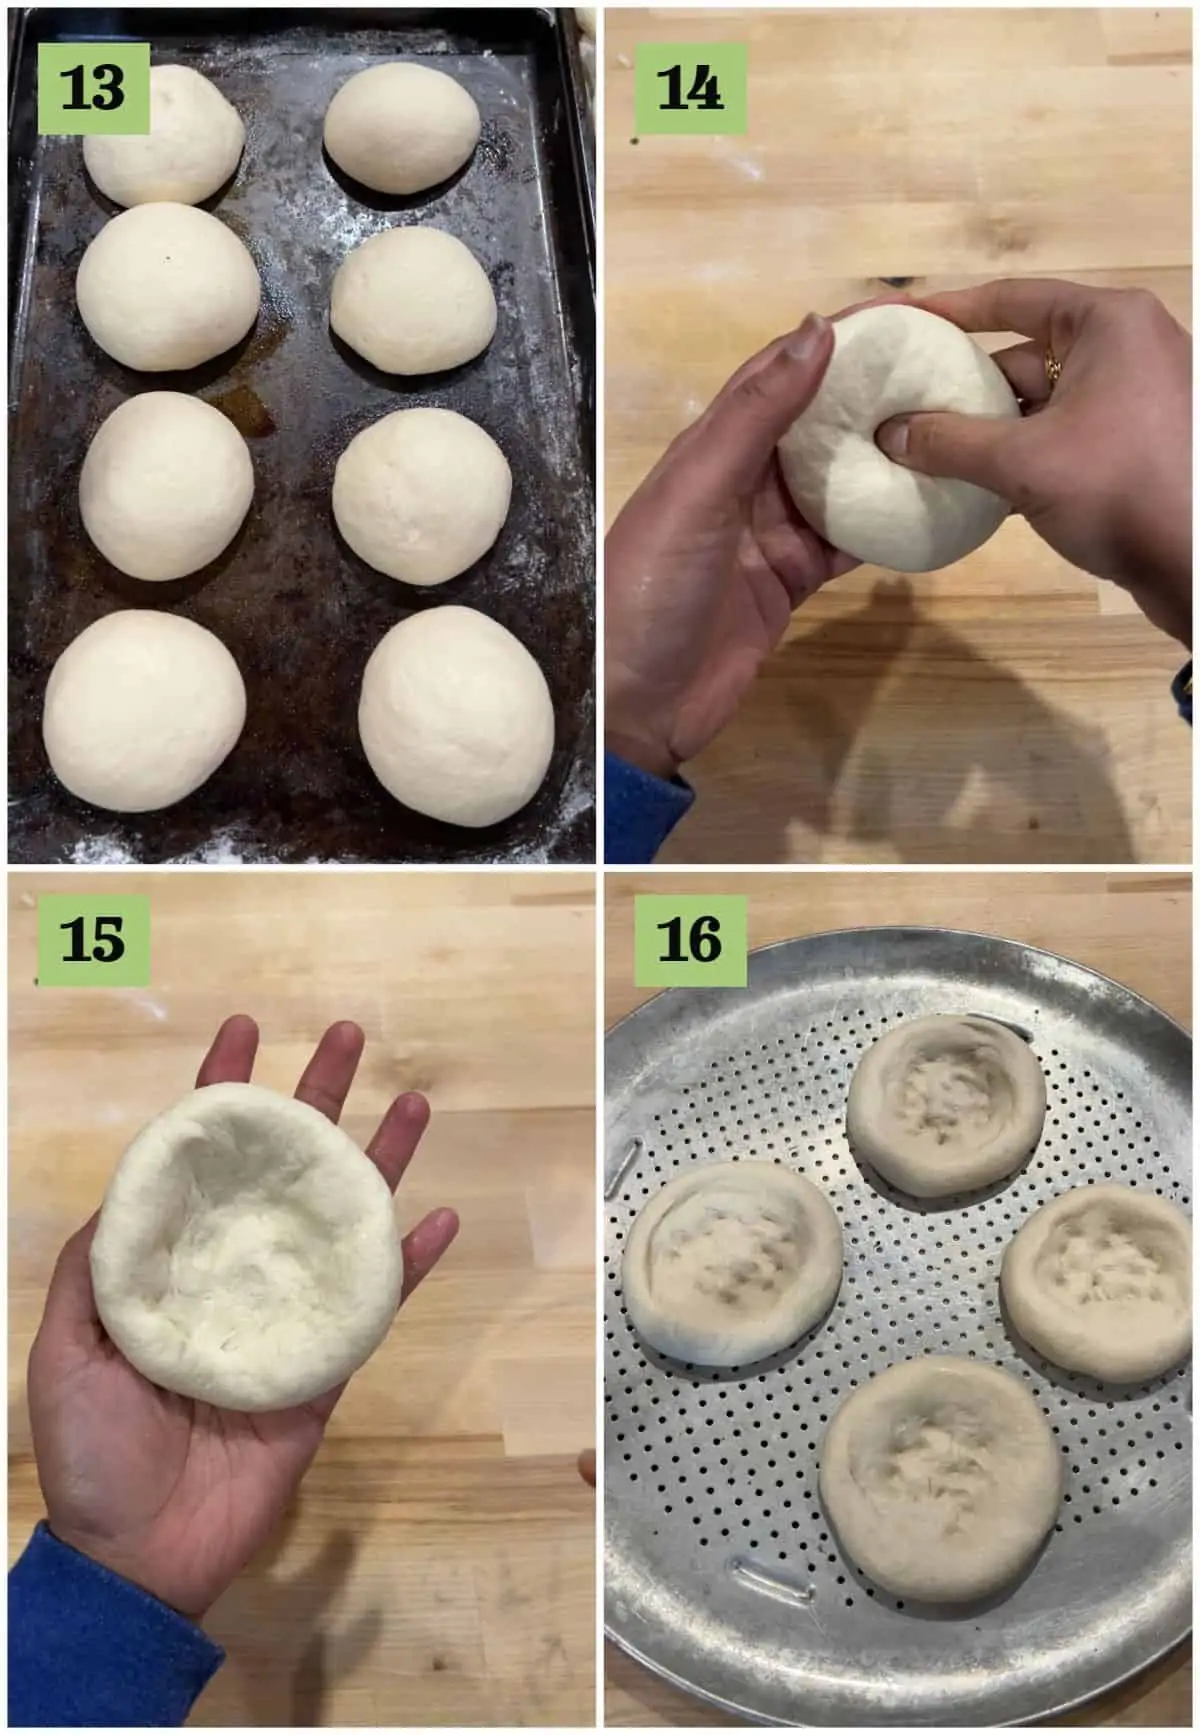 Process shot showing how to shape Bialy. 